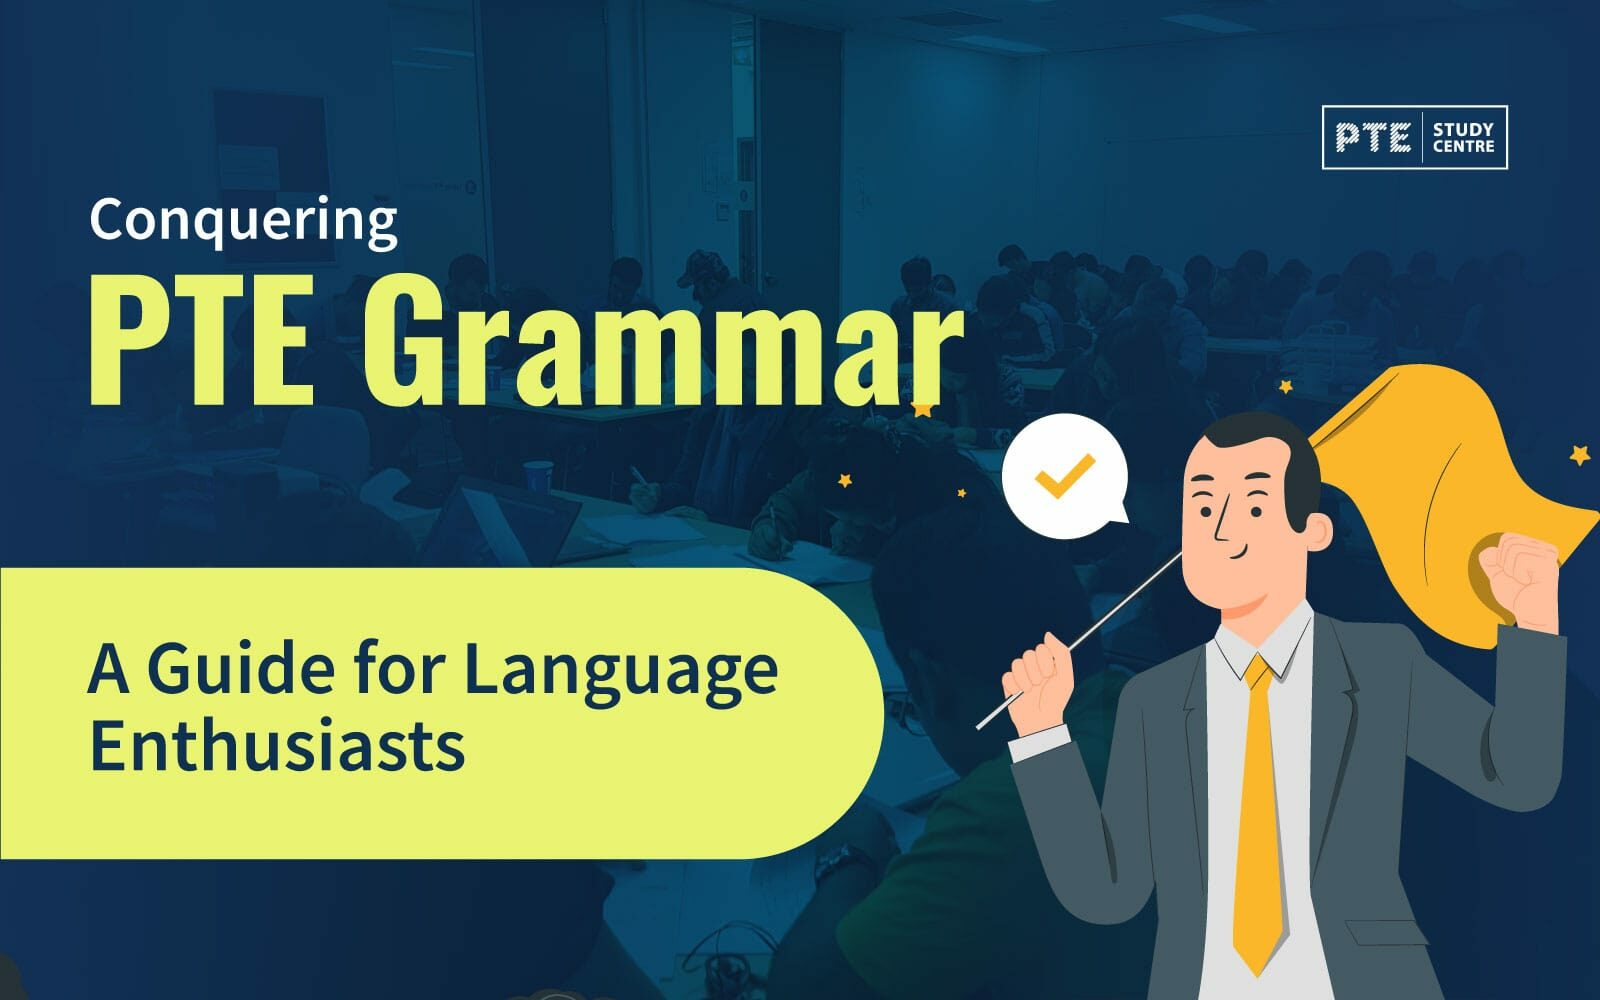 Conquering PTE Grammar: A Guide for Language Enthusiasts